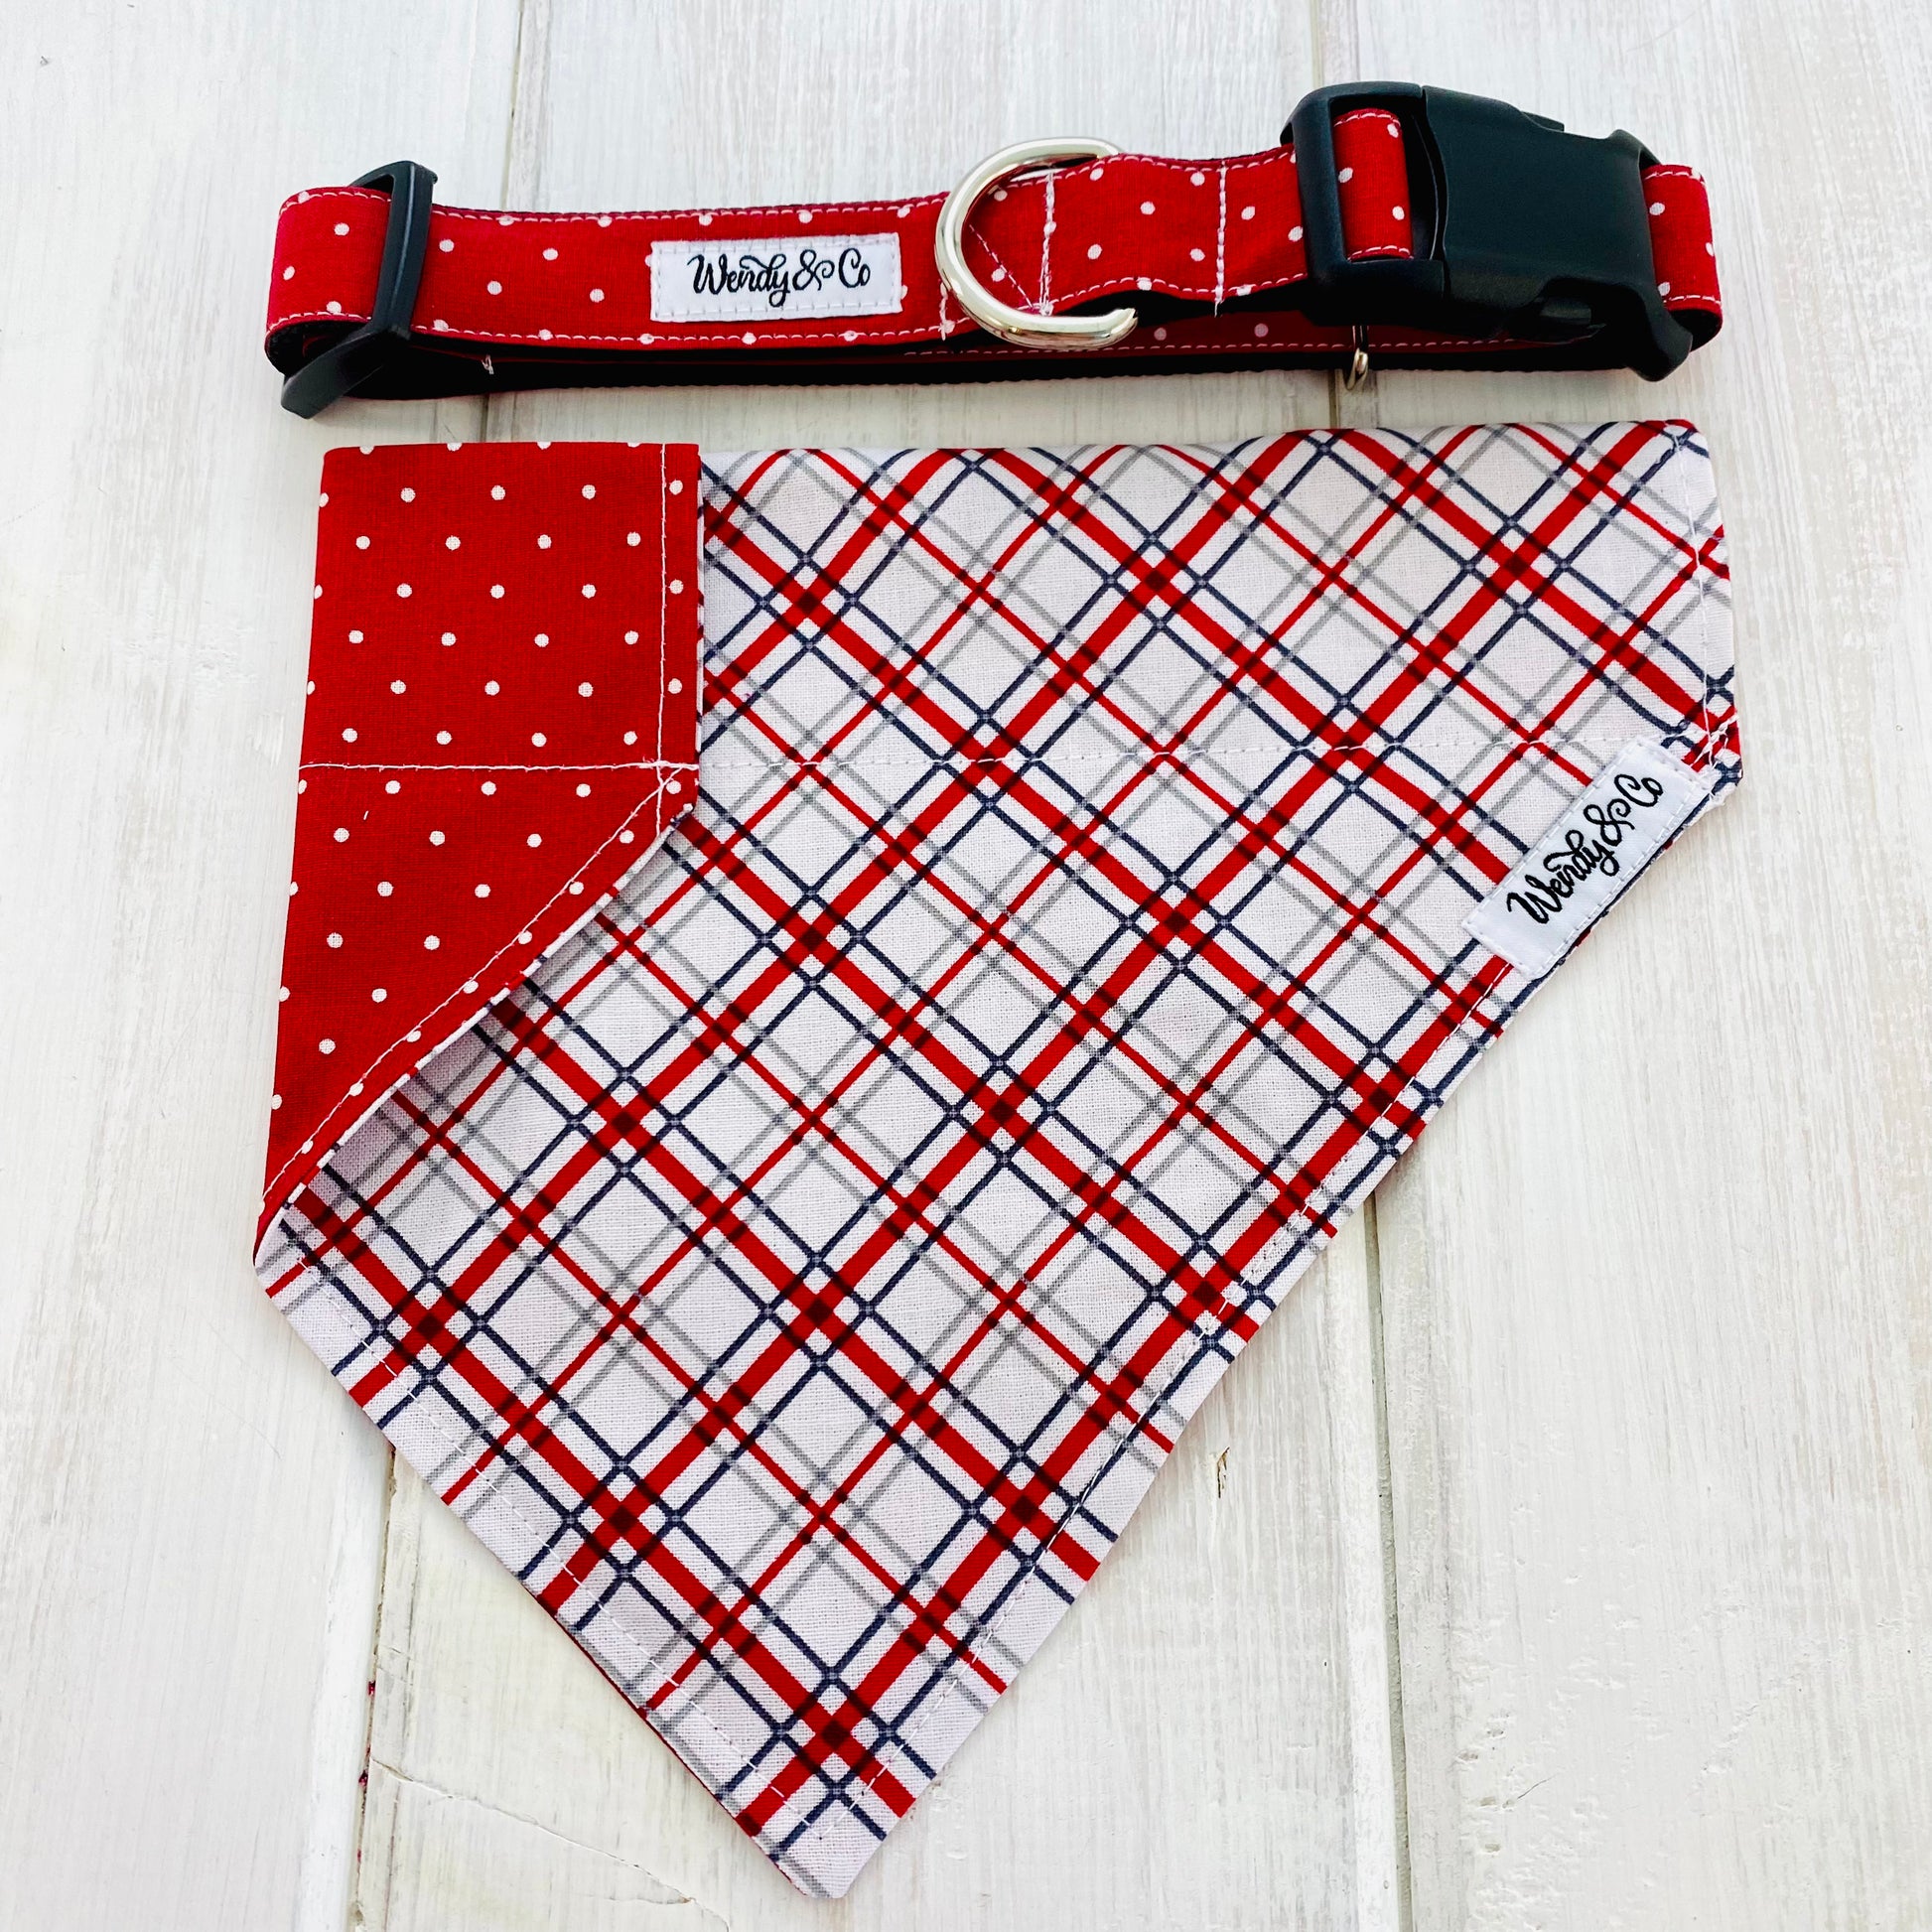 Red dot collar with red plaid reversible dog bandana.